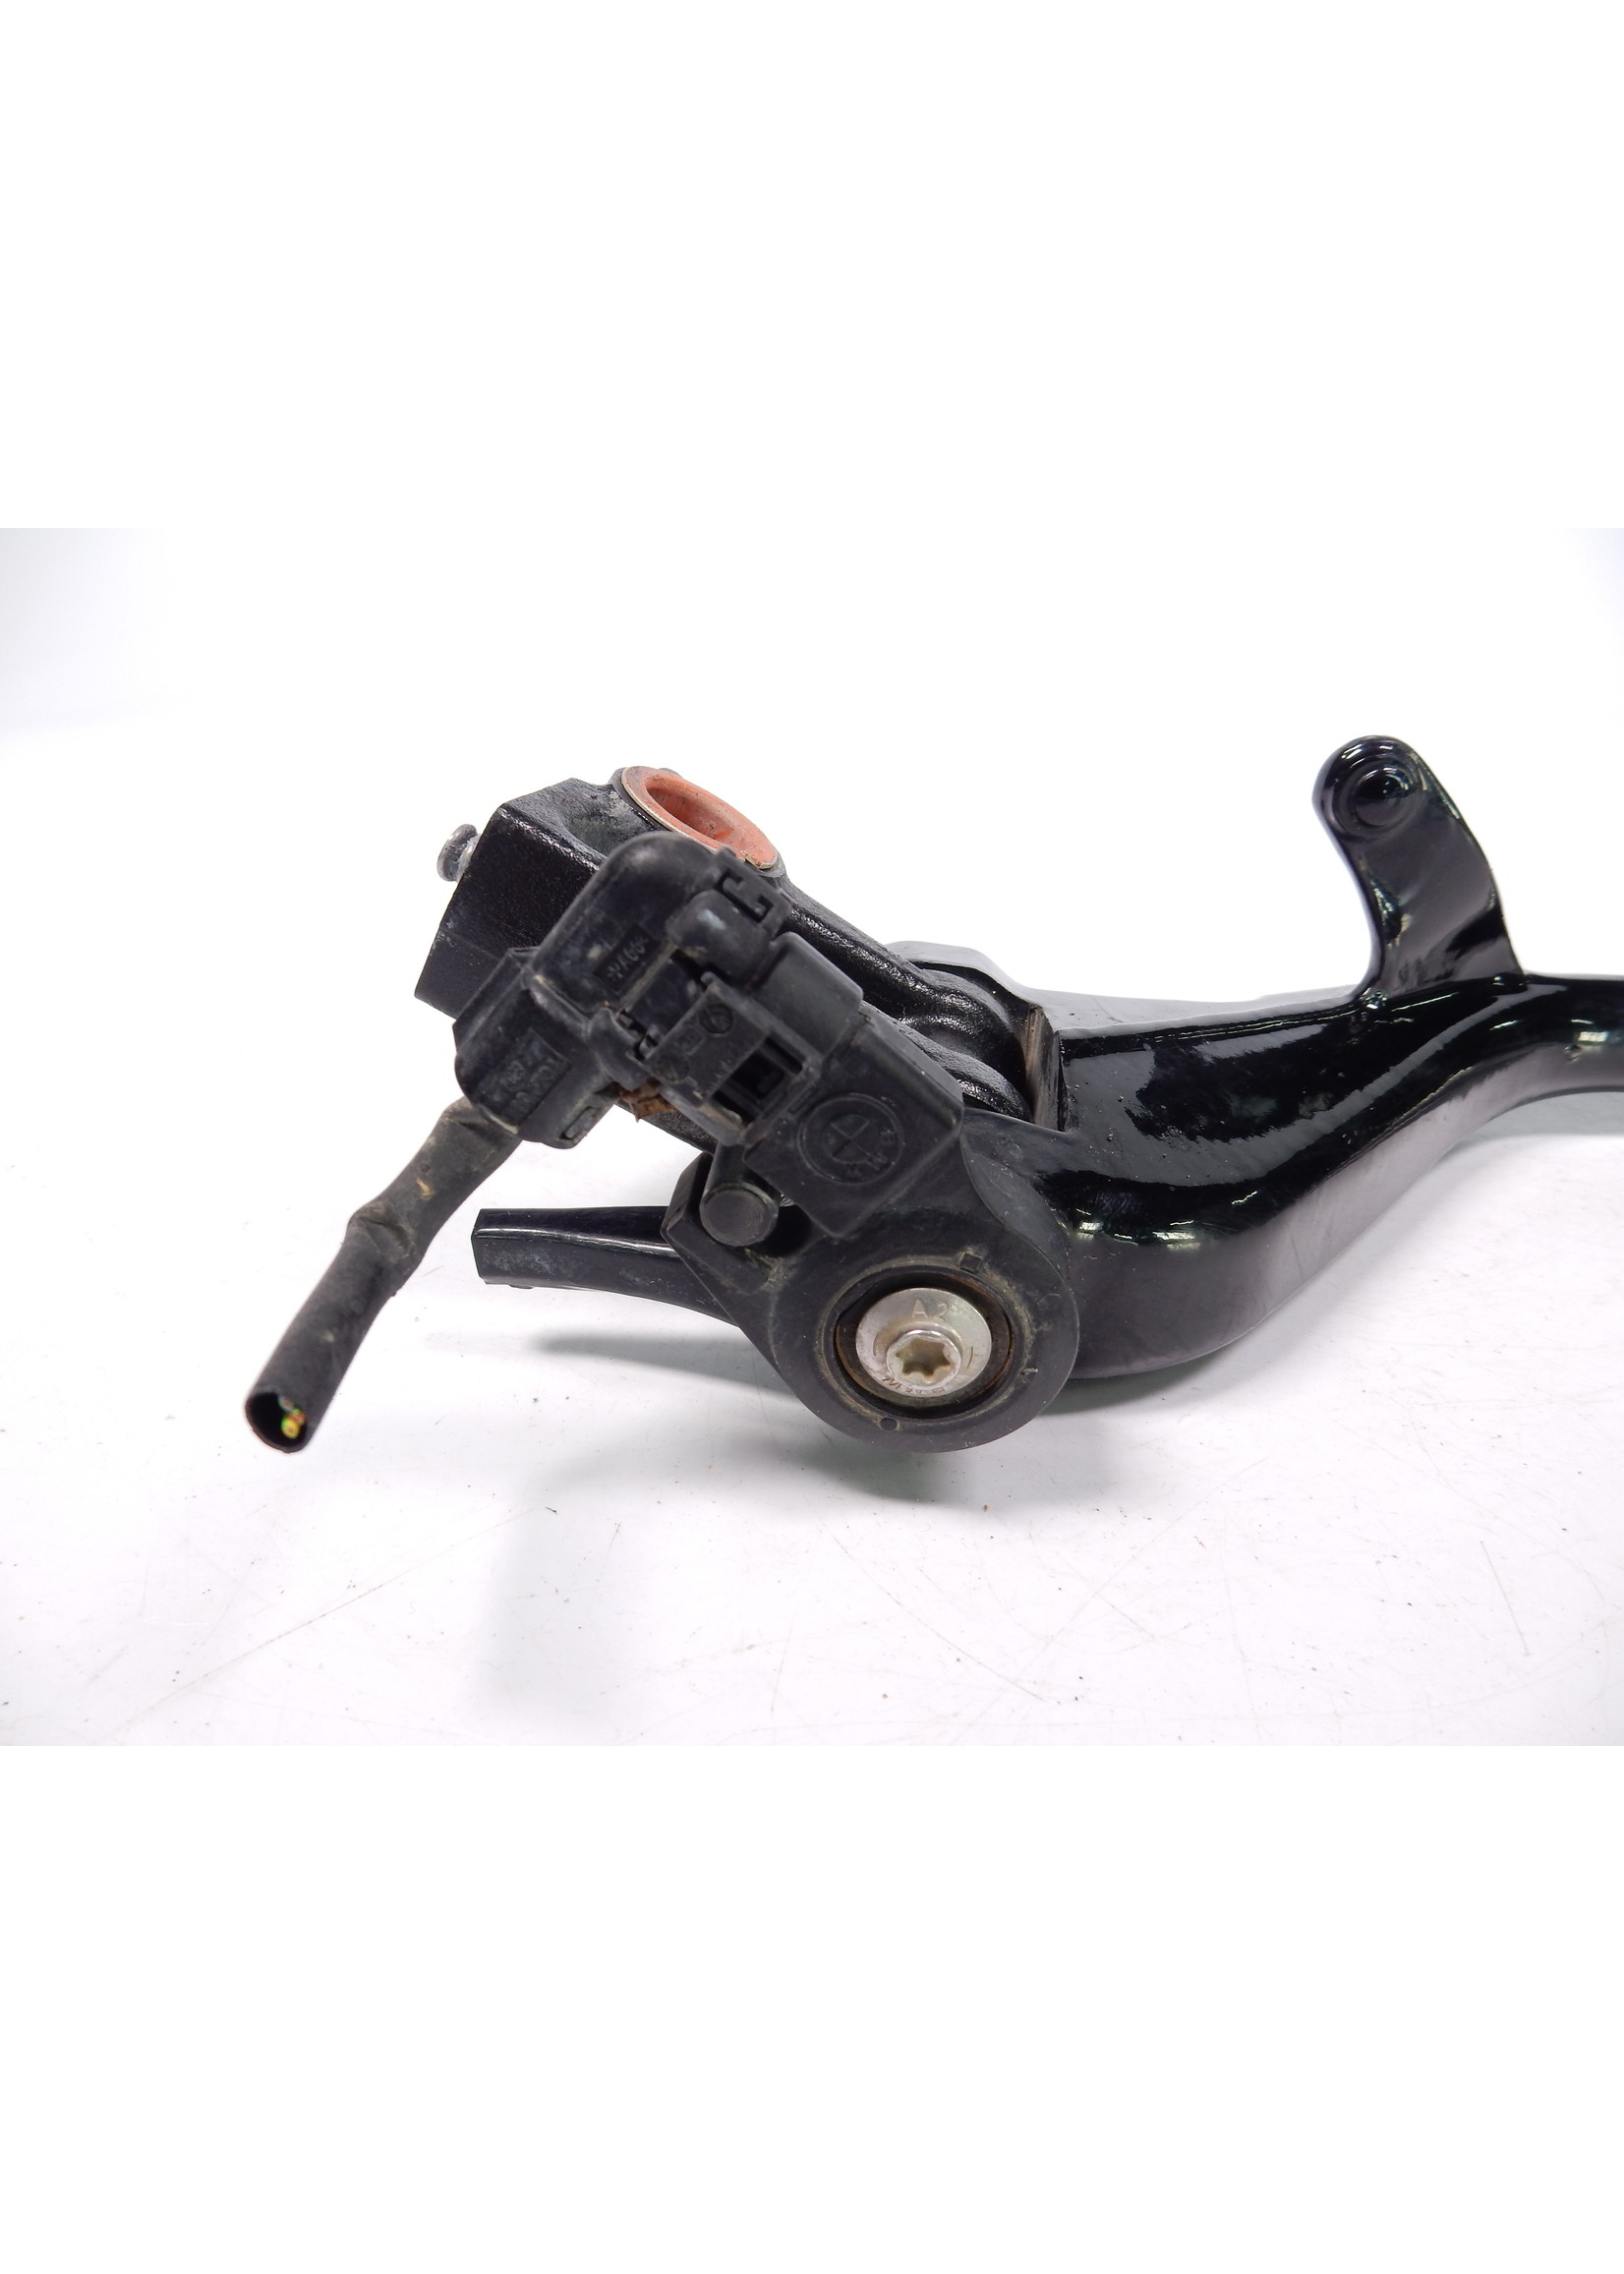 BMW BMW R18 Classic Side stand / Supporting bracket f side stand / Threaded bolt / Switch, side stand / 46539899212 / 46537923975 / 46539443378 / 61318388642